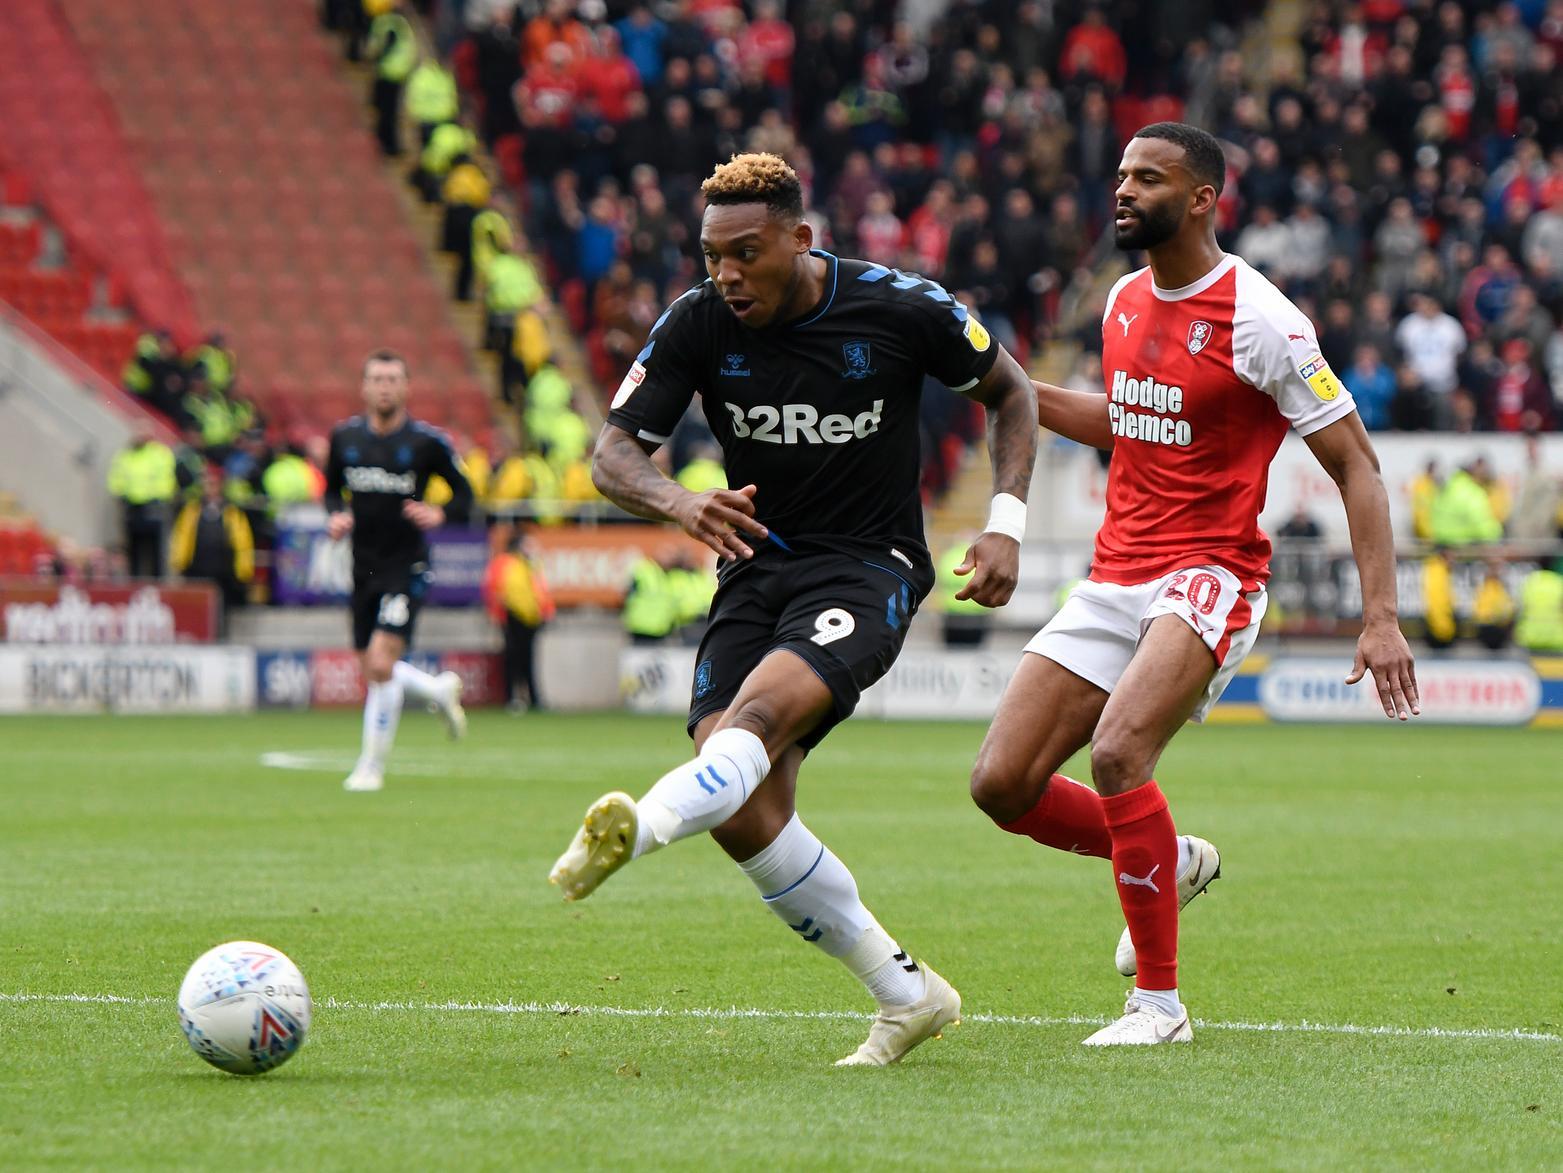 Aston Villa are understood to be interested in Middlesbrough duo Darren Randolph and Britt Assombalonga, but may have to fork out around 10m for the latter. (Team Talk)